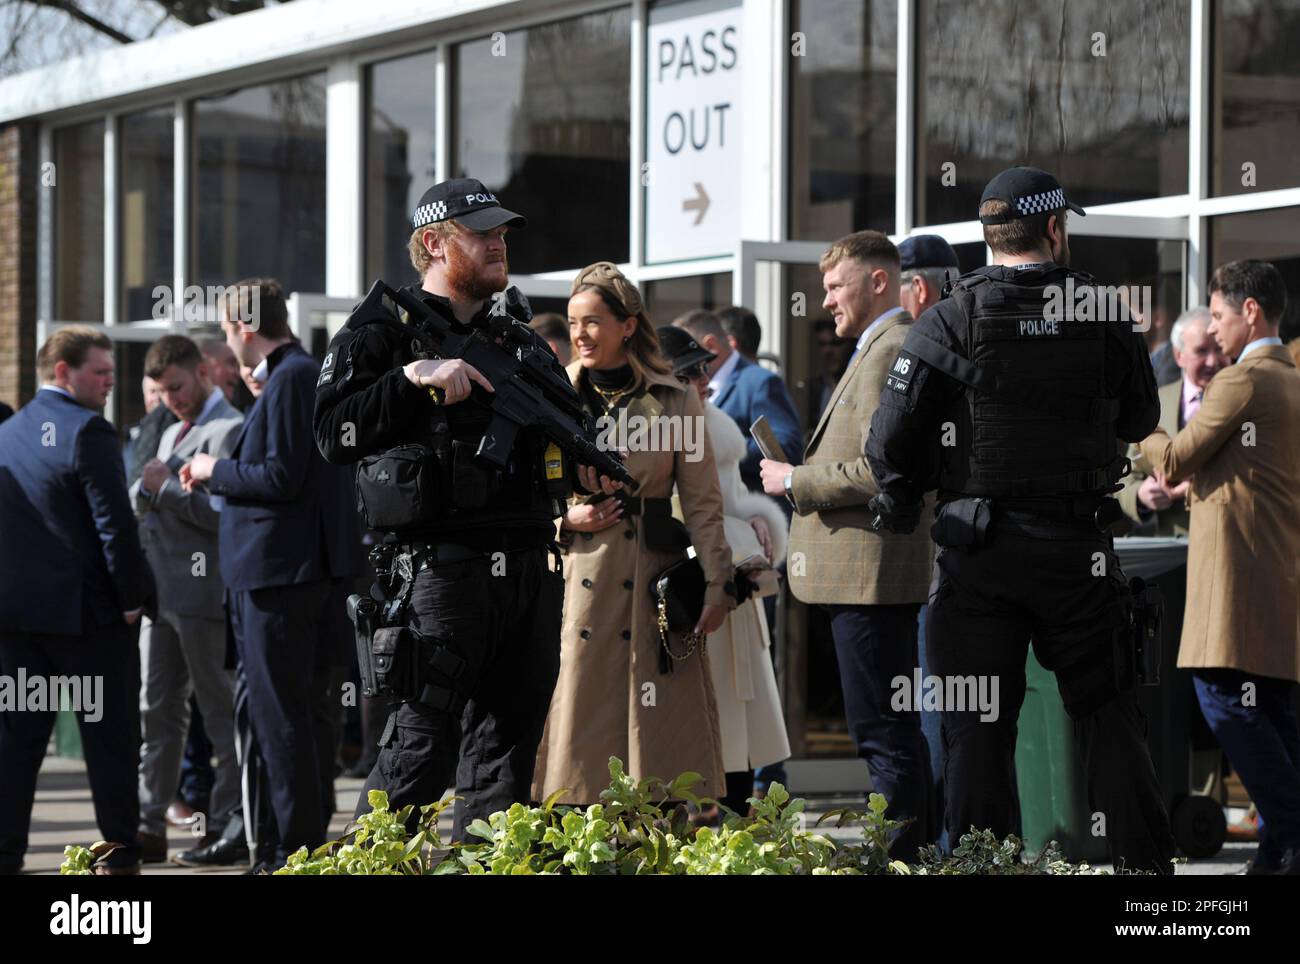 Armed police at the gate as crowds enter Cheltenham Racecourse   Horse racing at Cheltenham Racecourse on Day 4 the final day of the Cheltenham Festiv Stock Photo